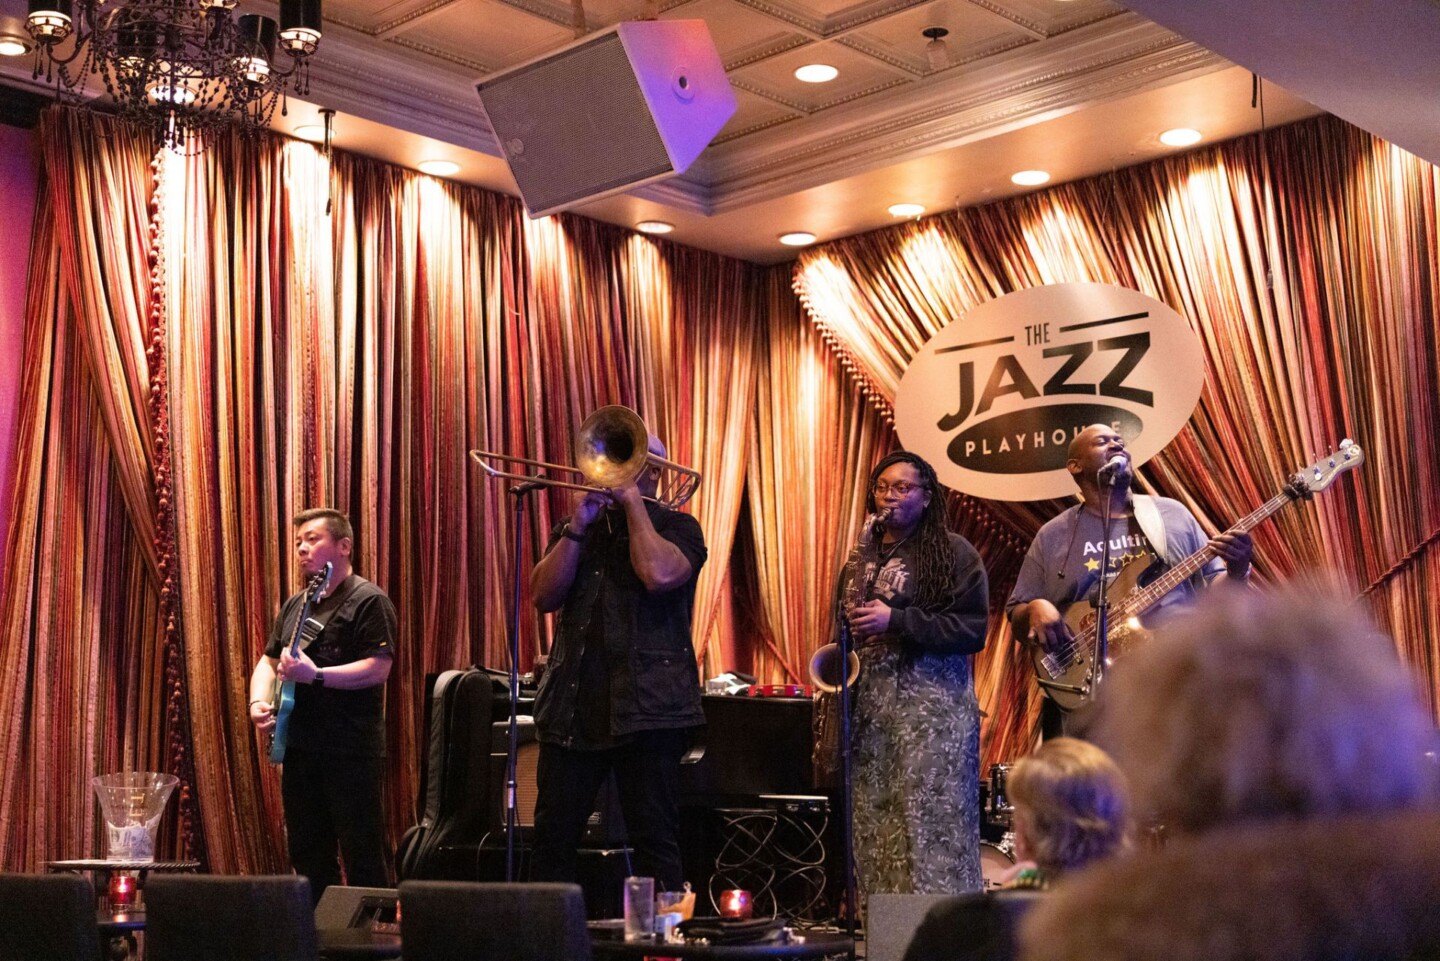 The Jazz Playhouse in New Orleans